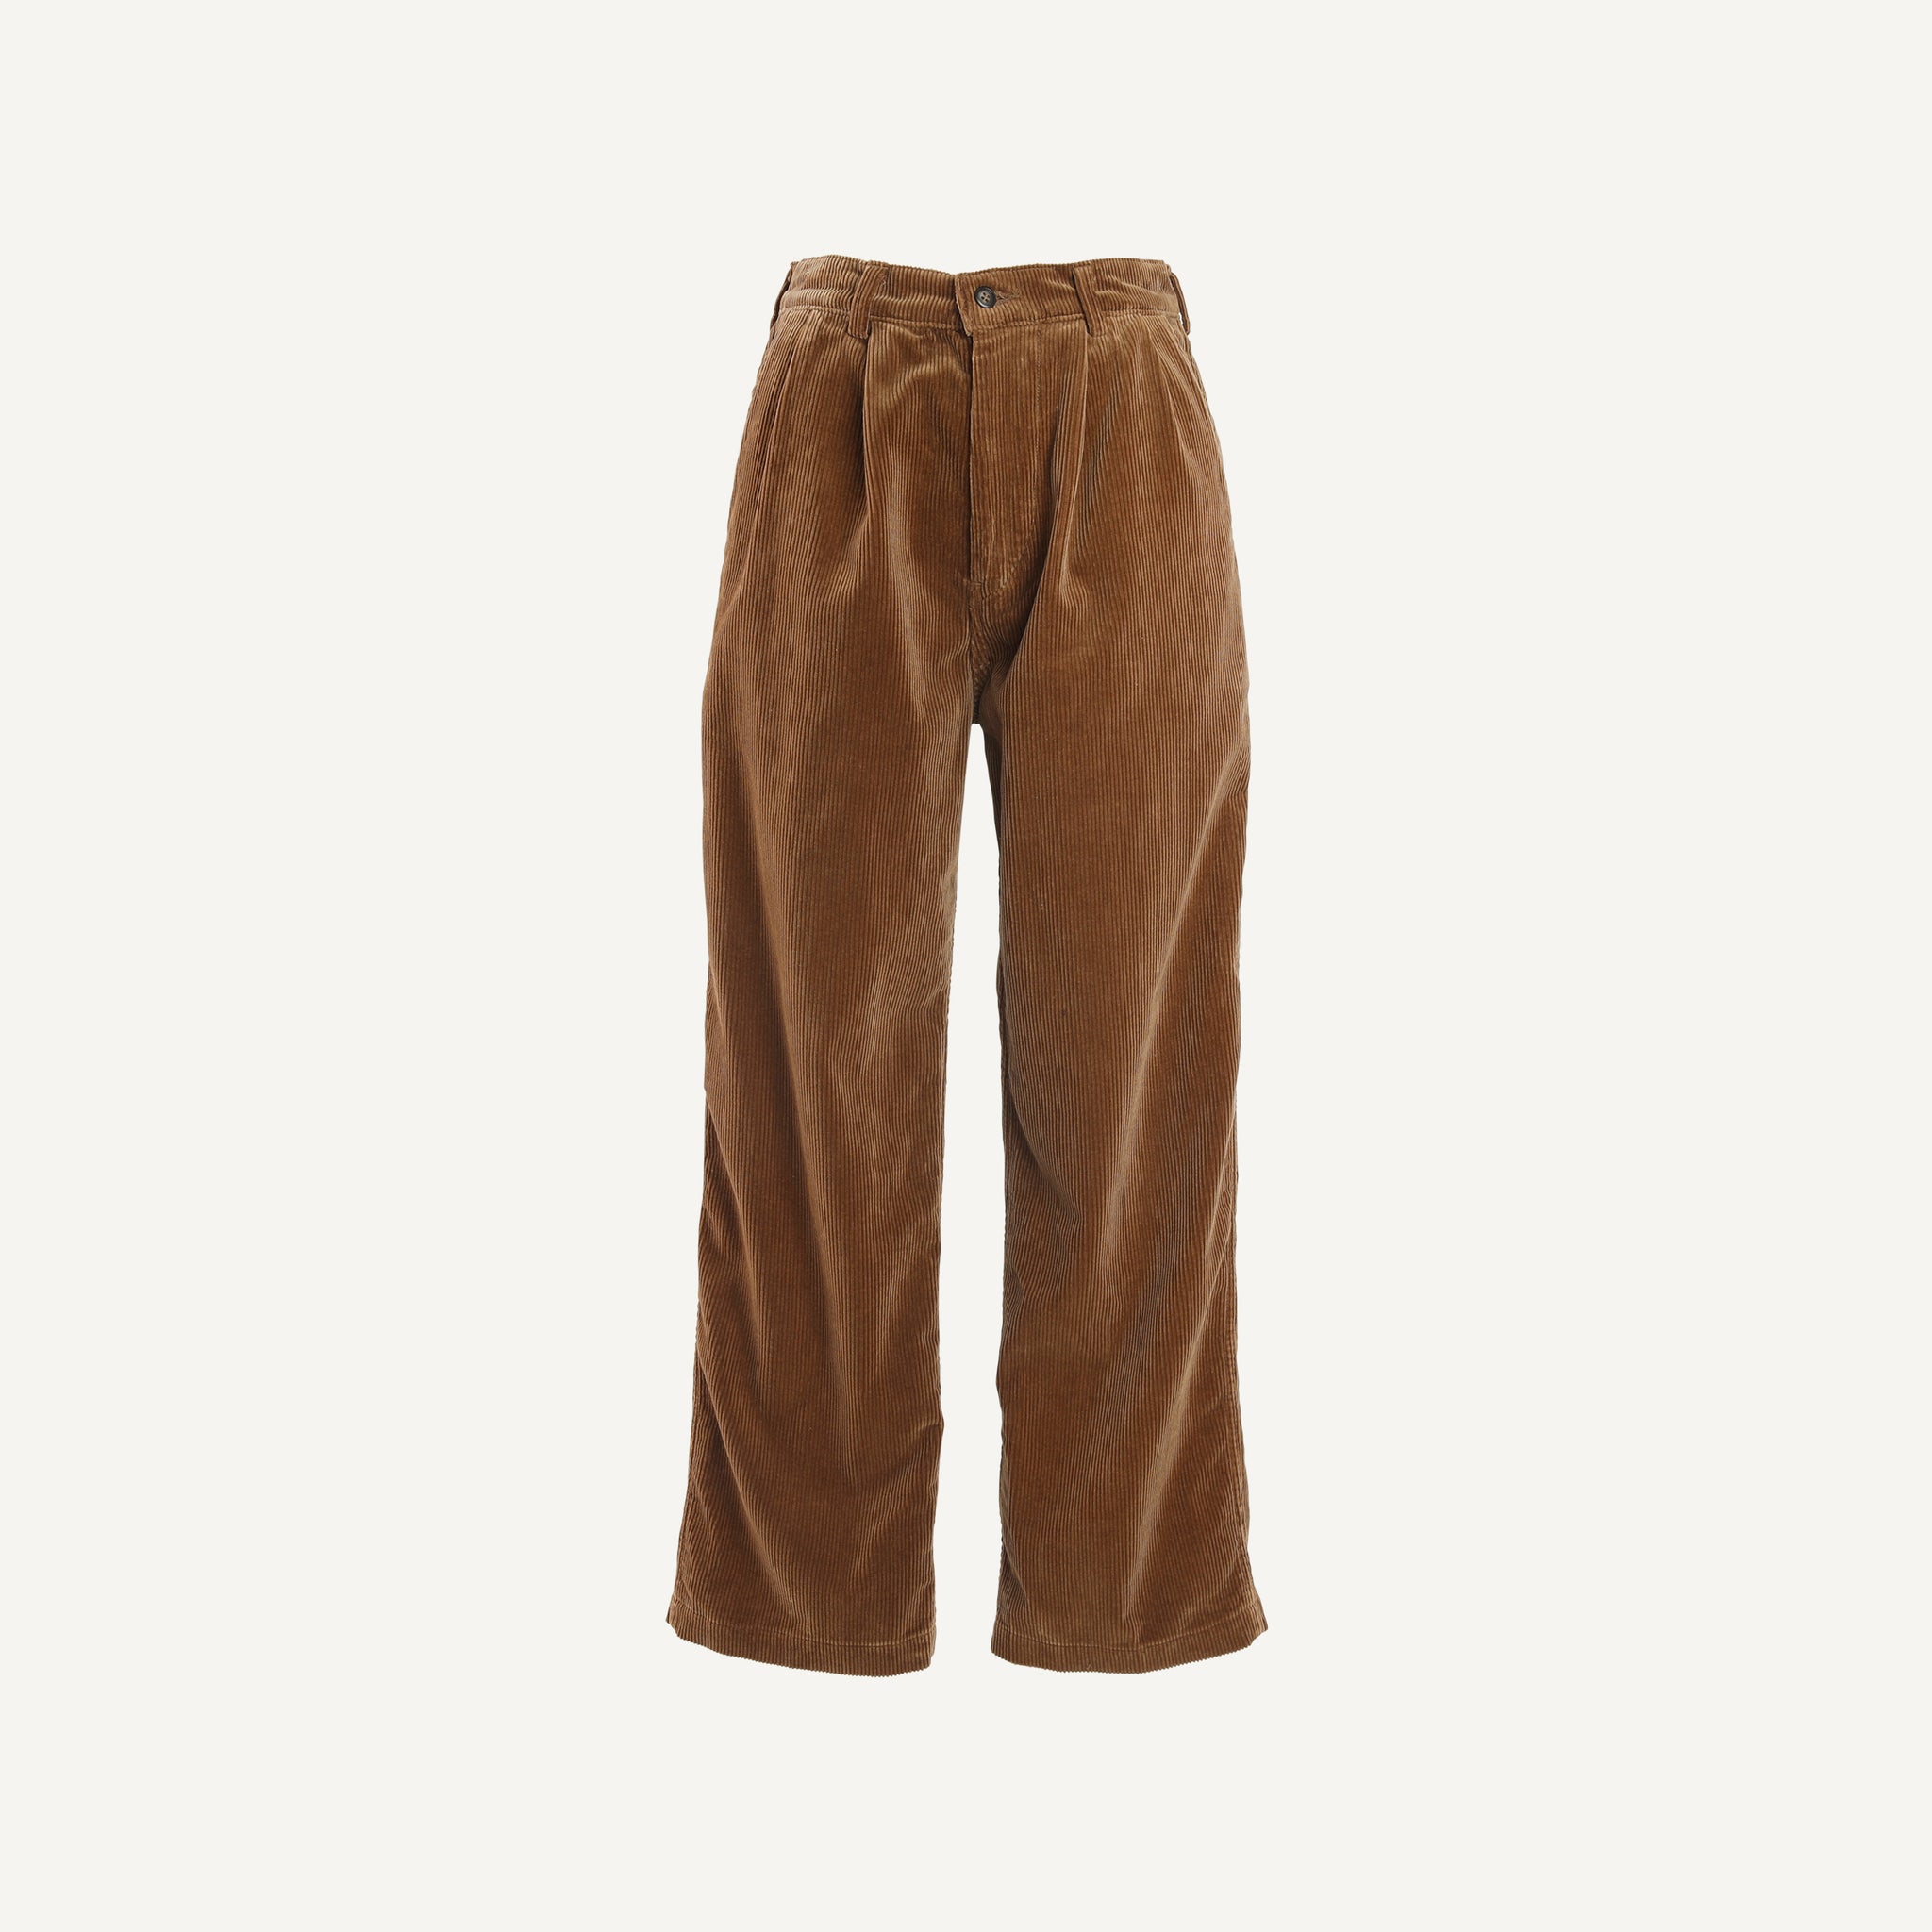 ORSLOW RELAXED CORDUROY NAVAL PANTS